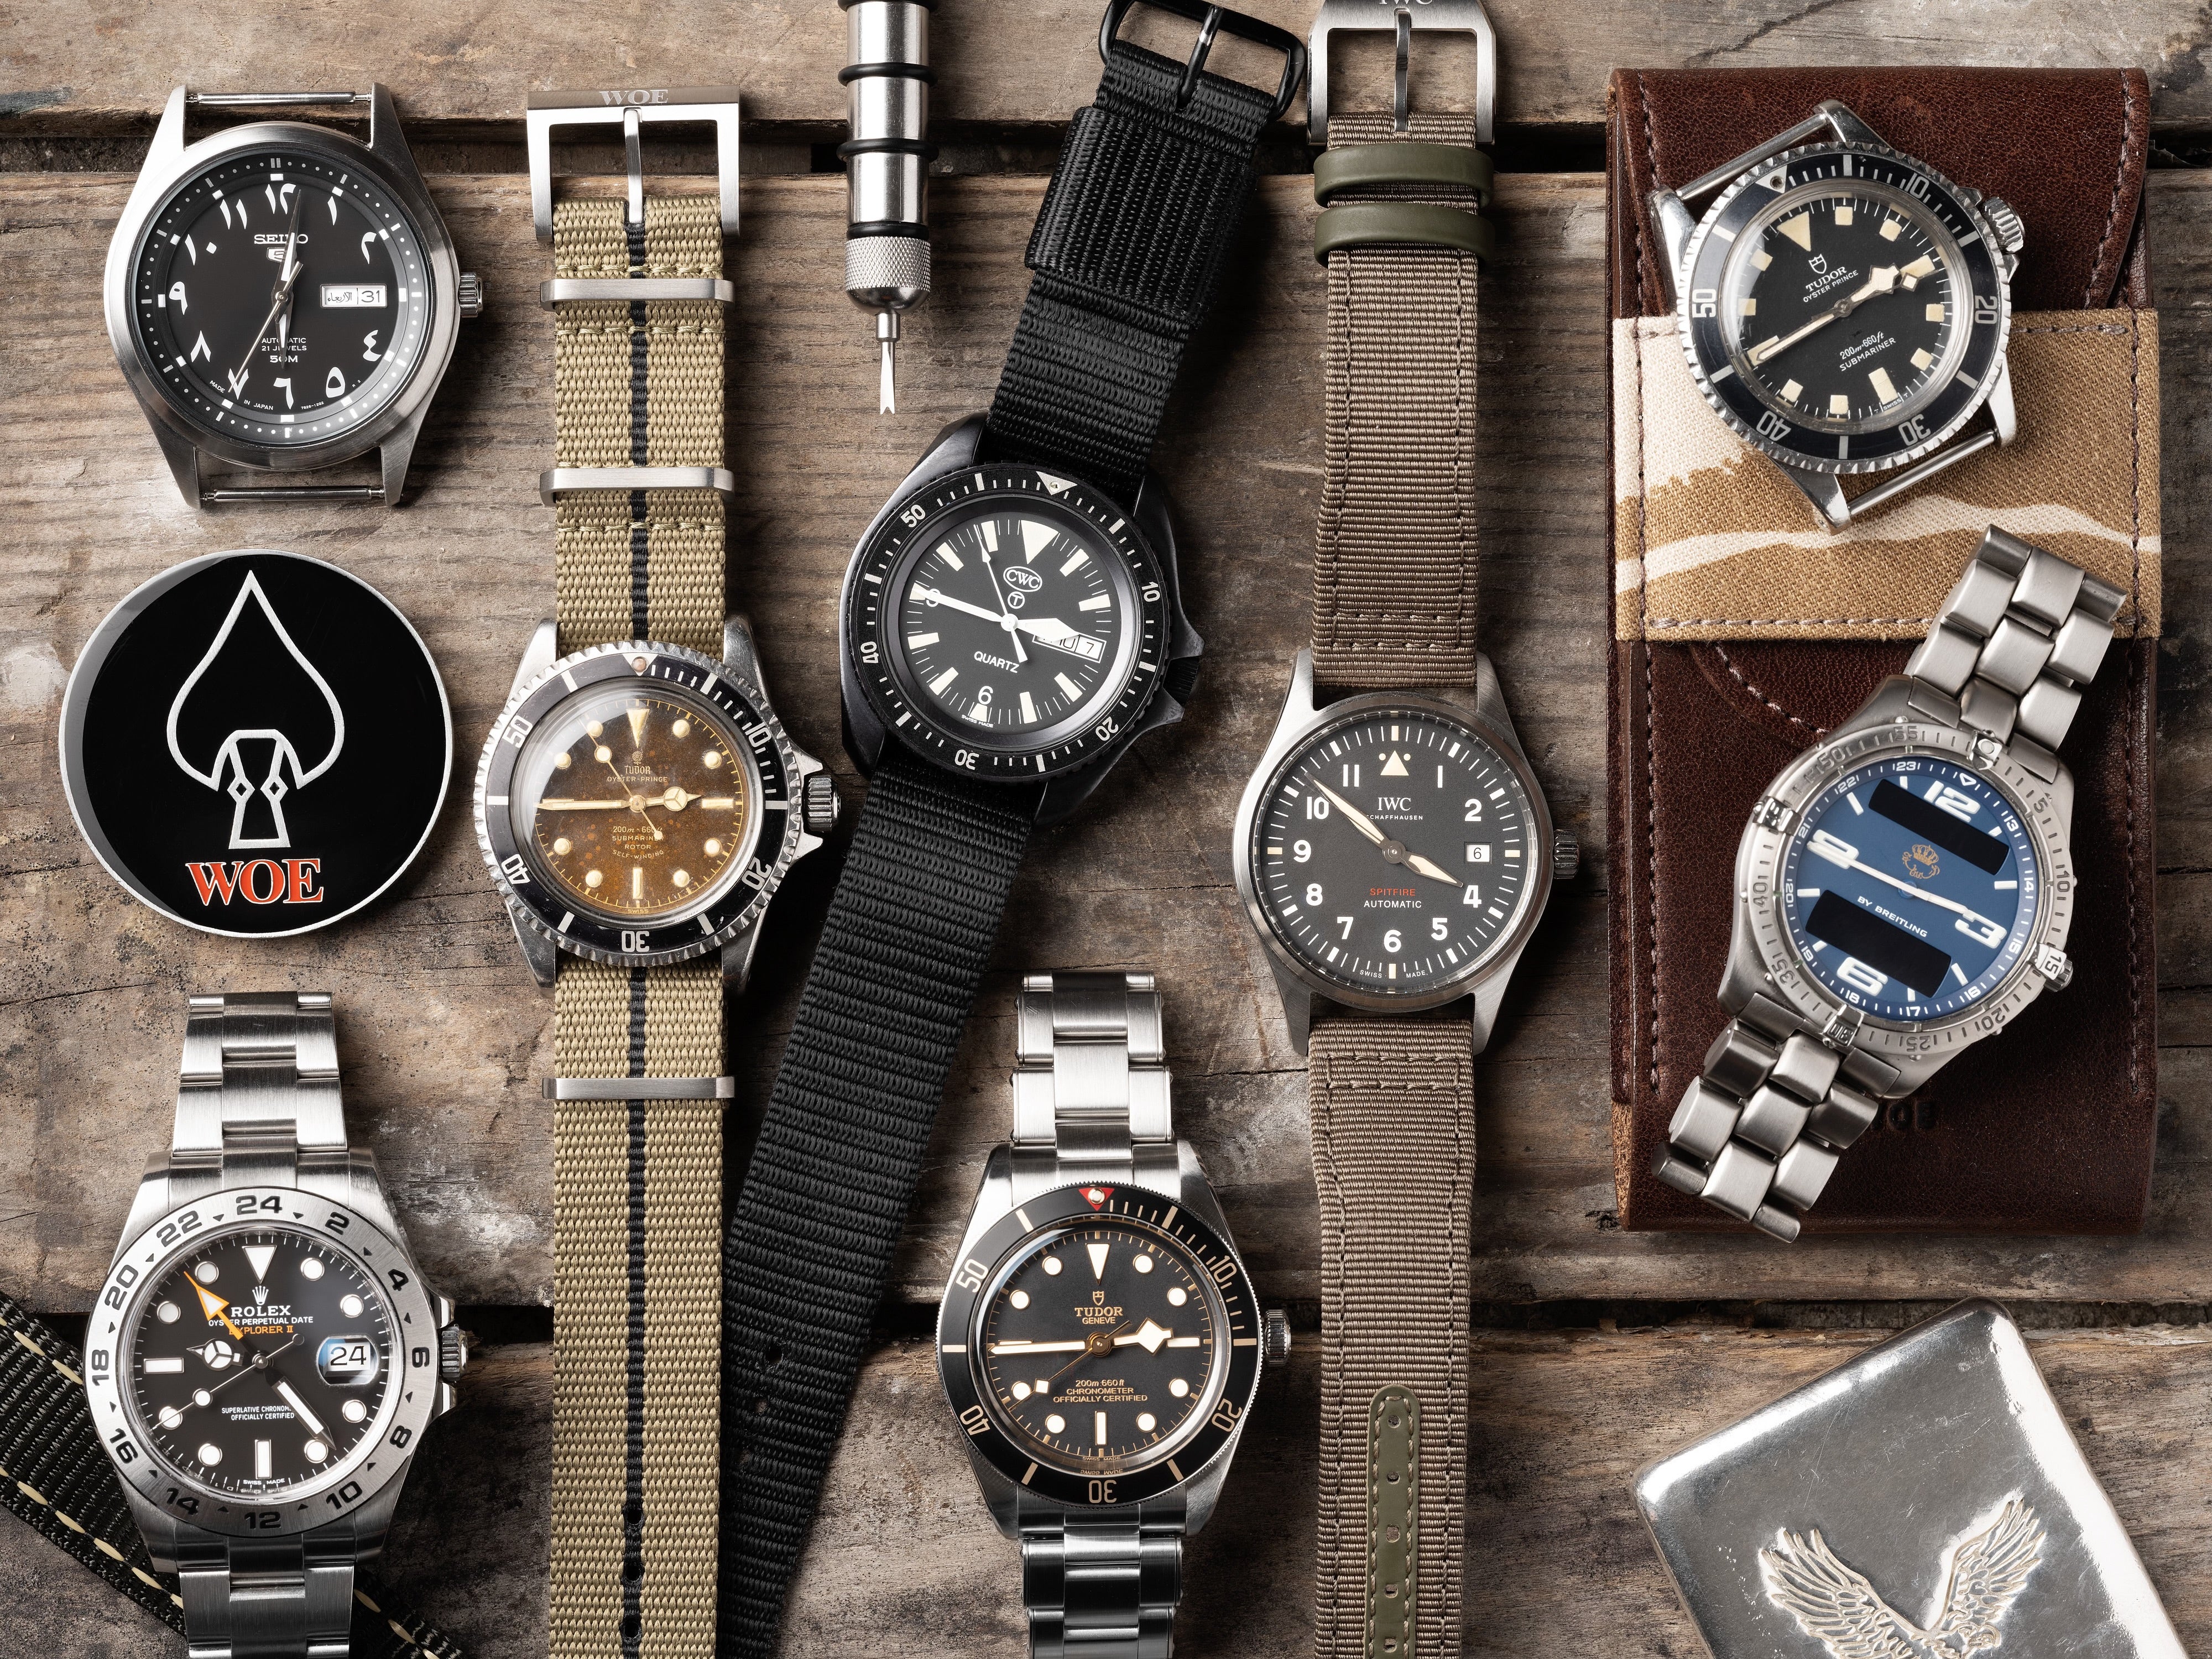 The Seiko 5 Sports Field Is Reborn as the Newest Affordable GMT -  Revolution Watch